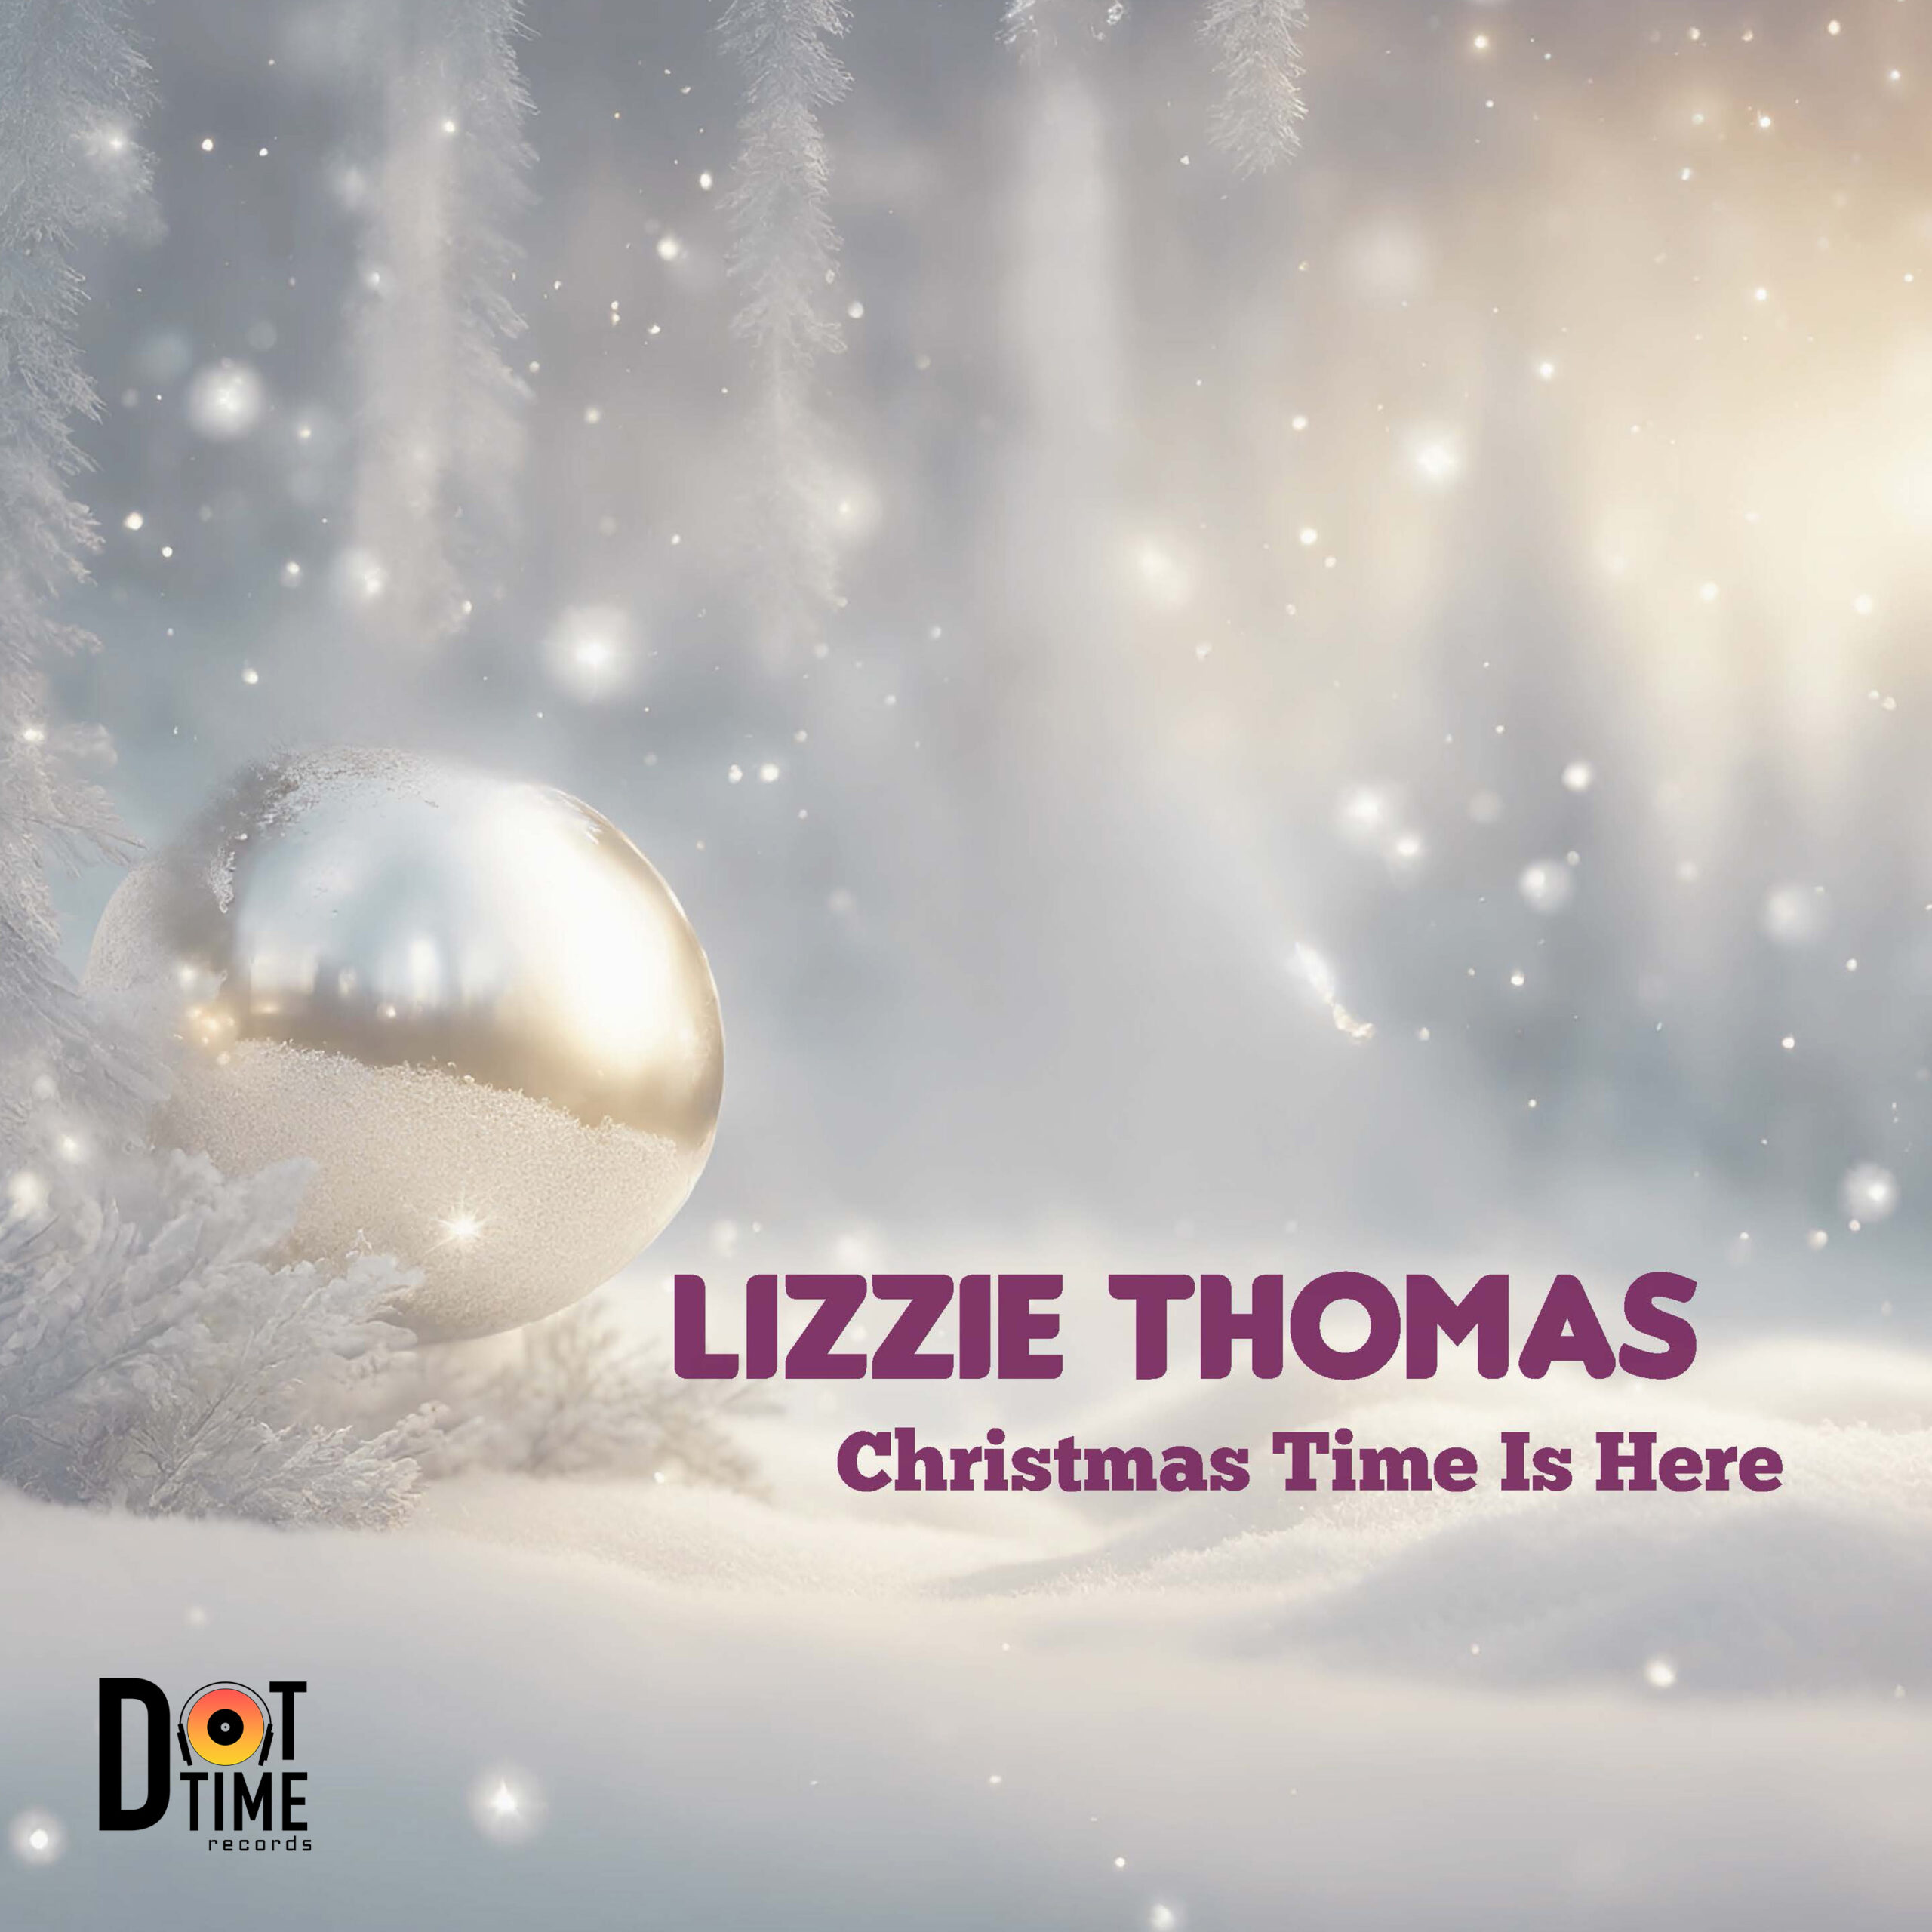 Lizzie Thomas - Christmas Time Is Here 3000x3000